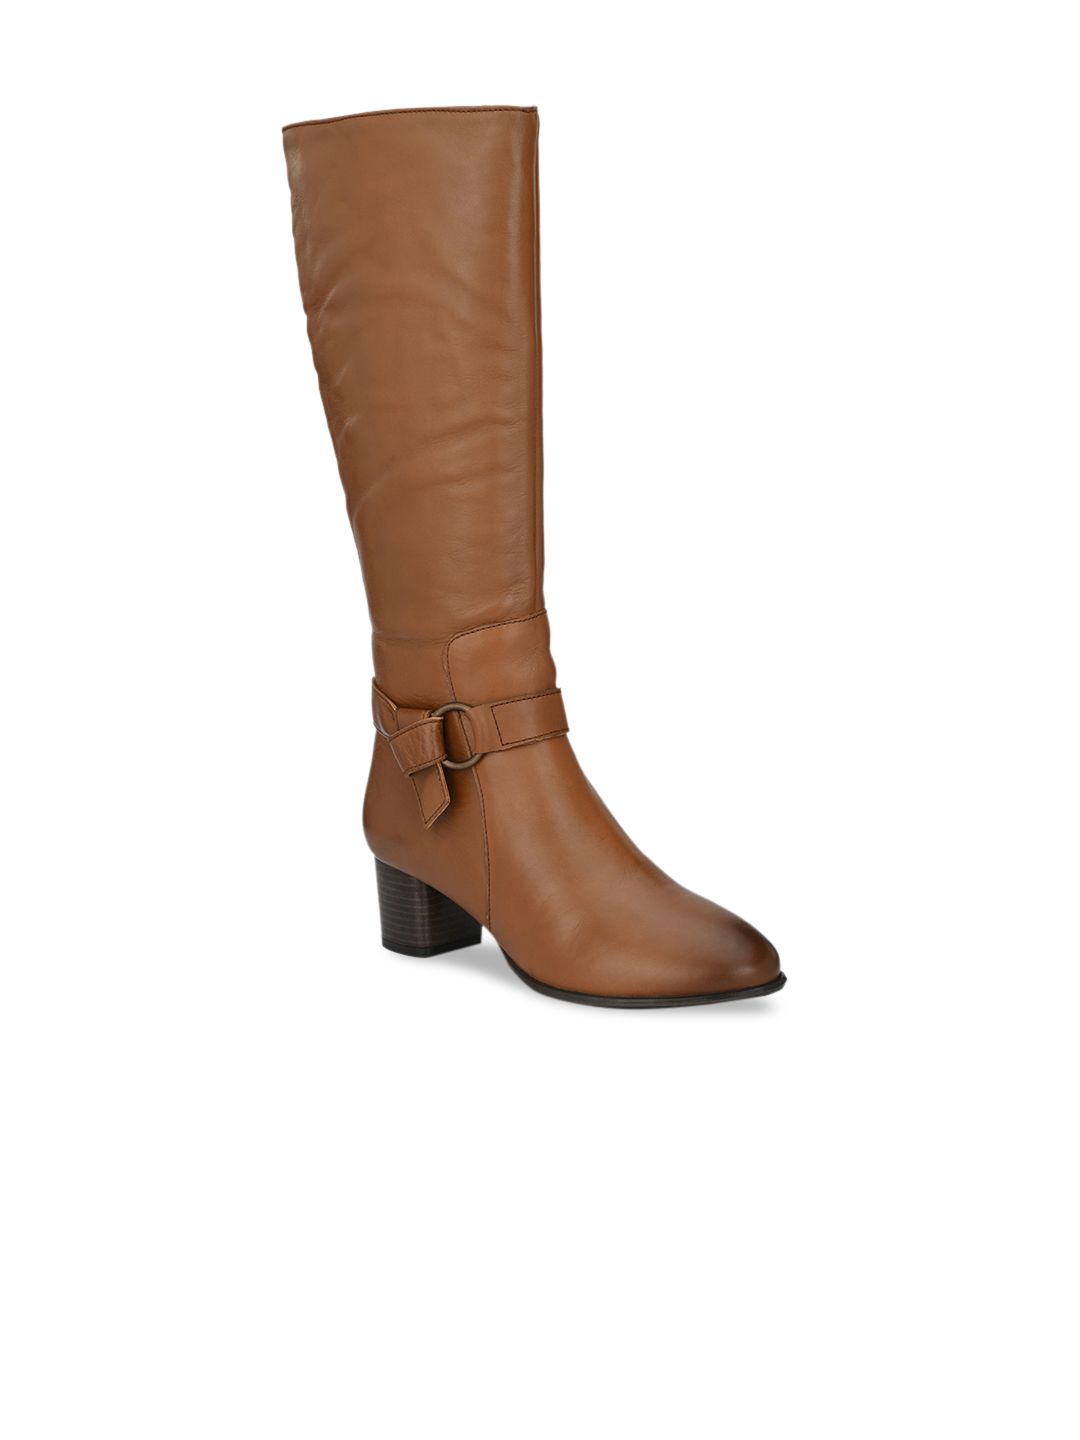 Delize Tan Brown Leather High-Top Block Heeled Boots with Buckles Price in India